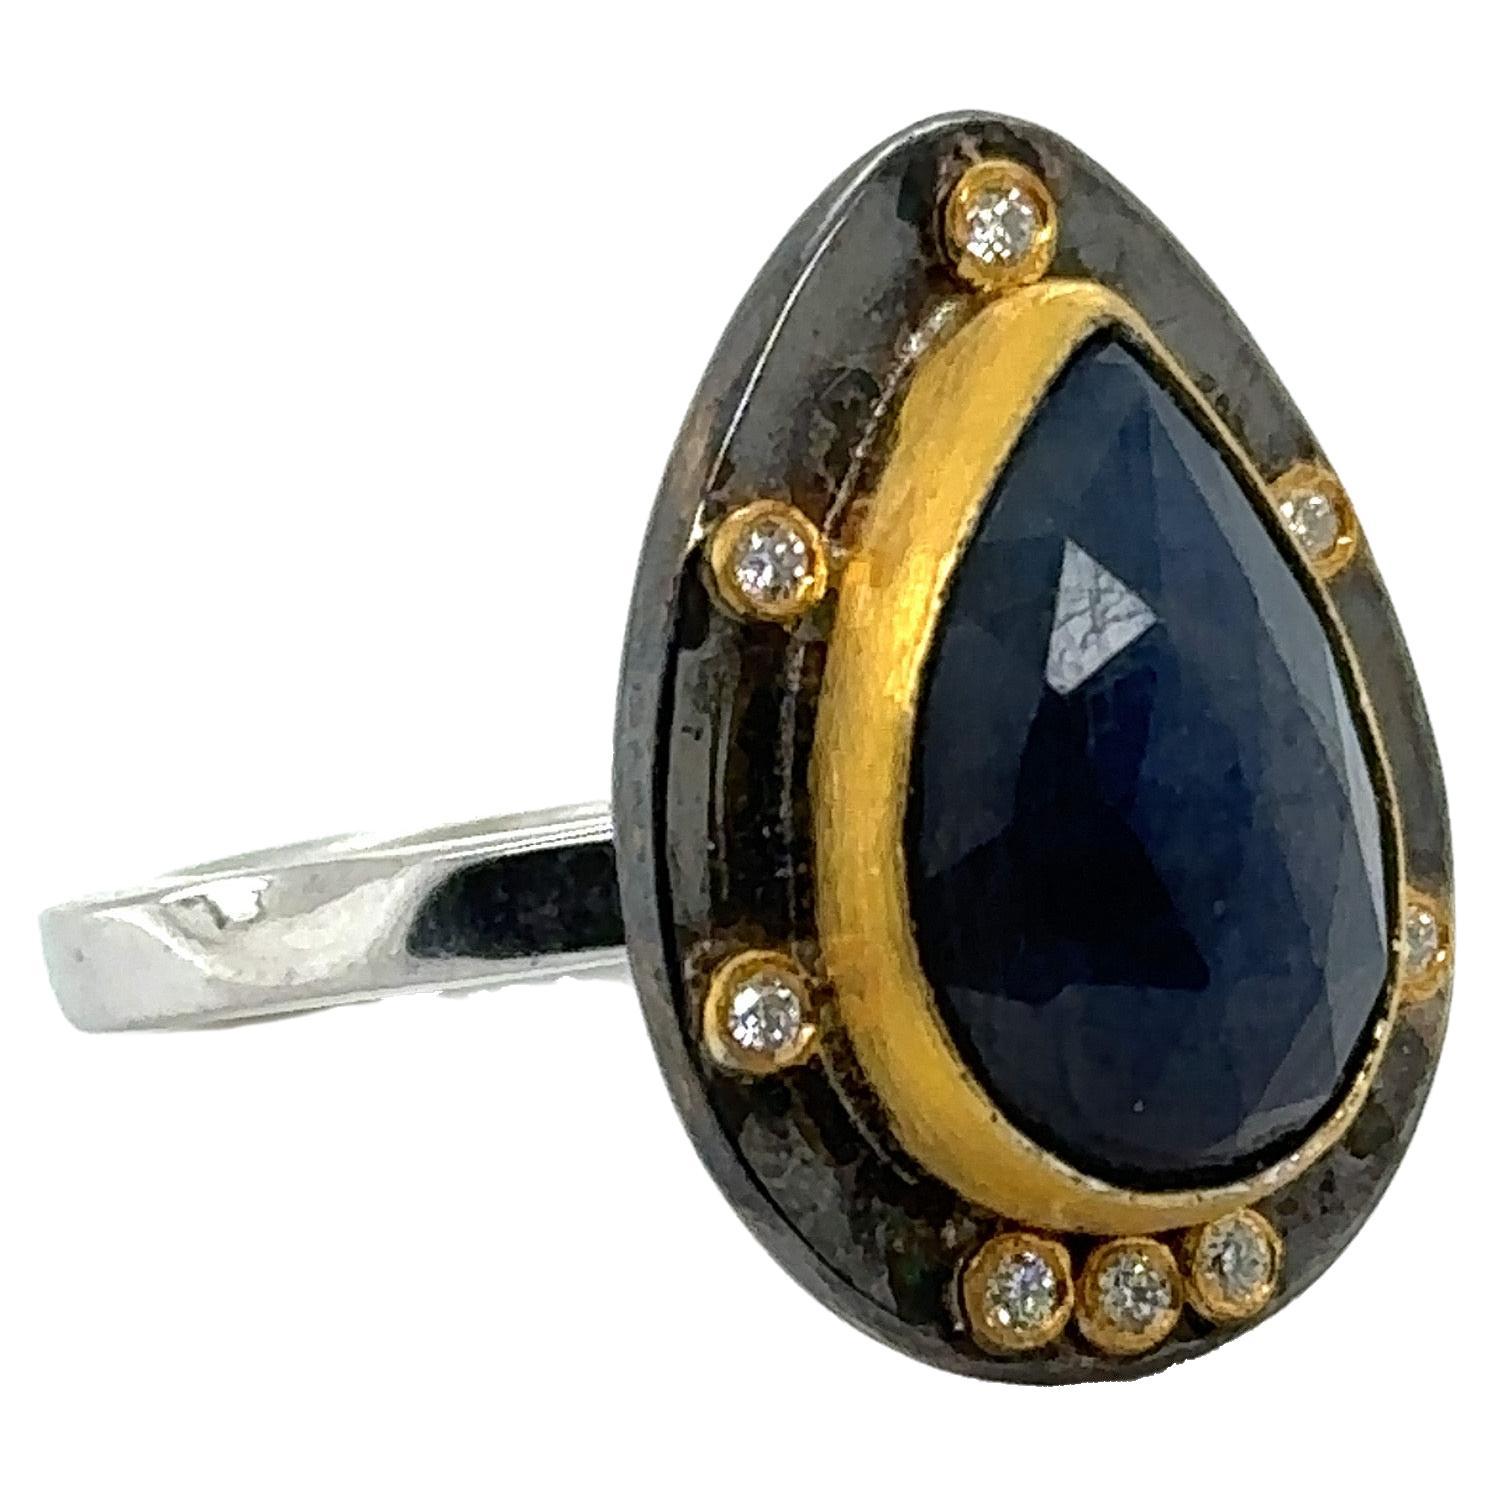 JAS-19-1804 - 24K GOLD/STERLING SILVER RING with 6.00 CT PEAR SHAPE SAPPHIRE For Sale